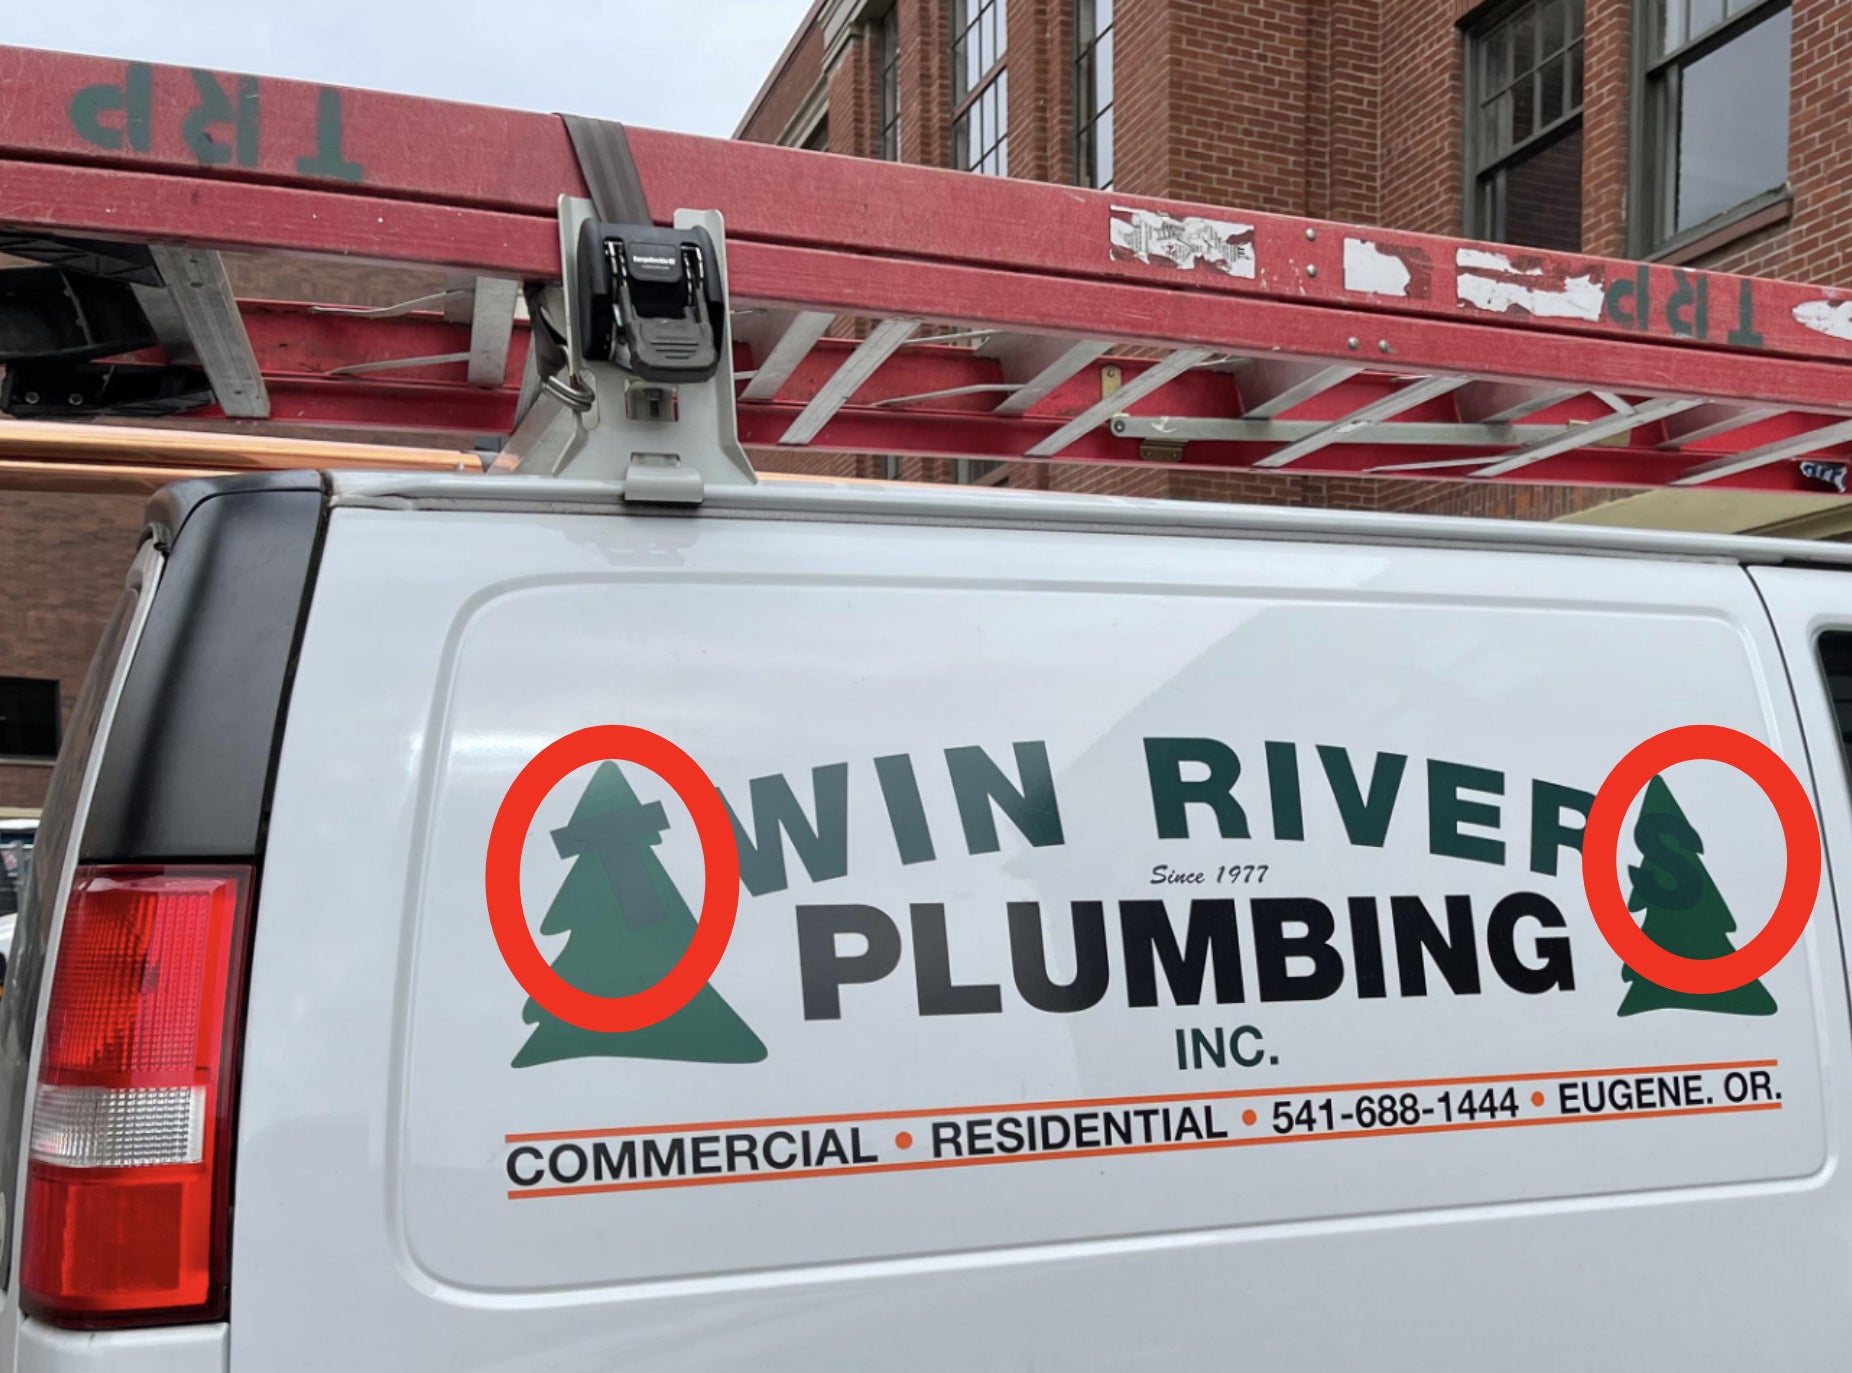 A plumbing logo with two trees on the side of a van